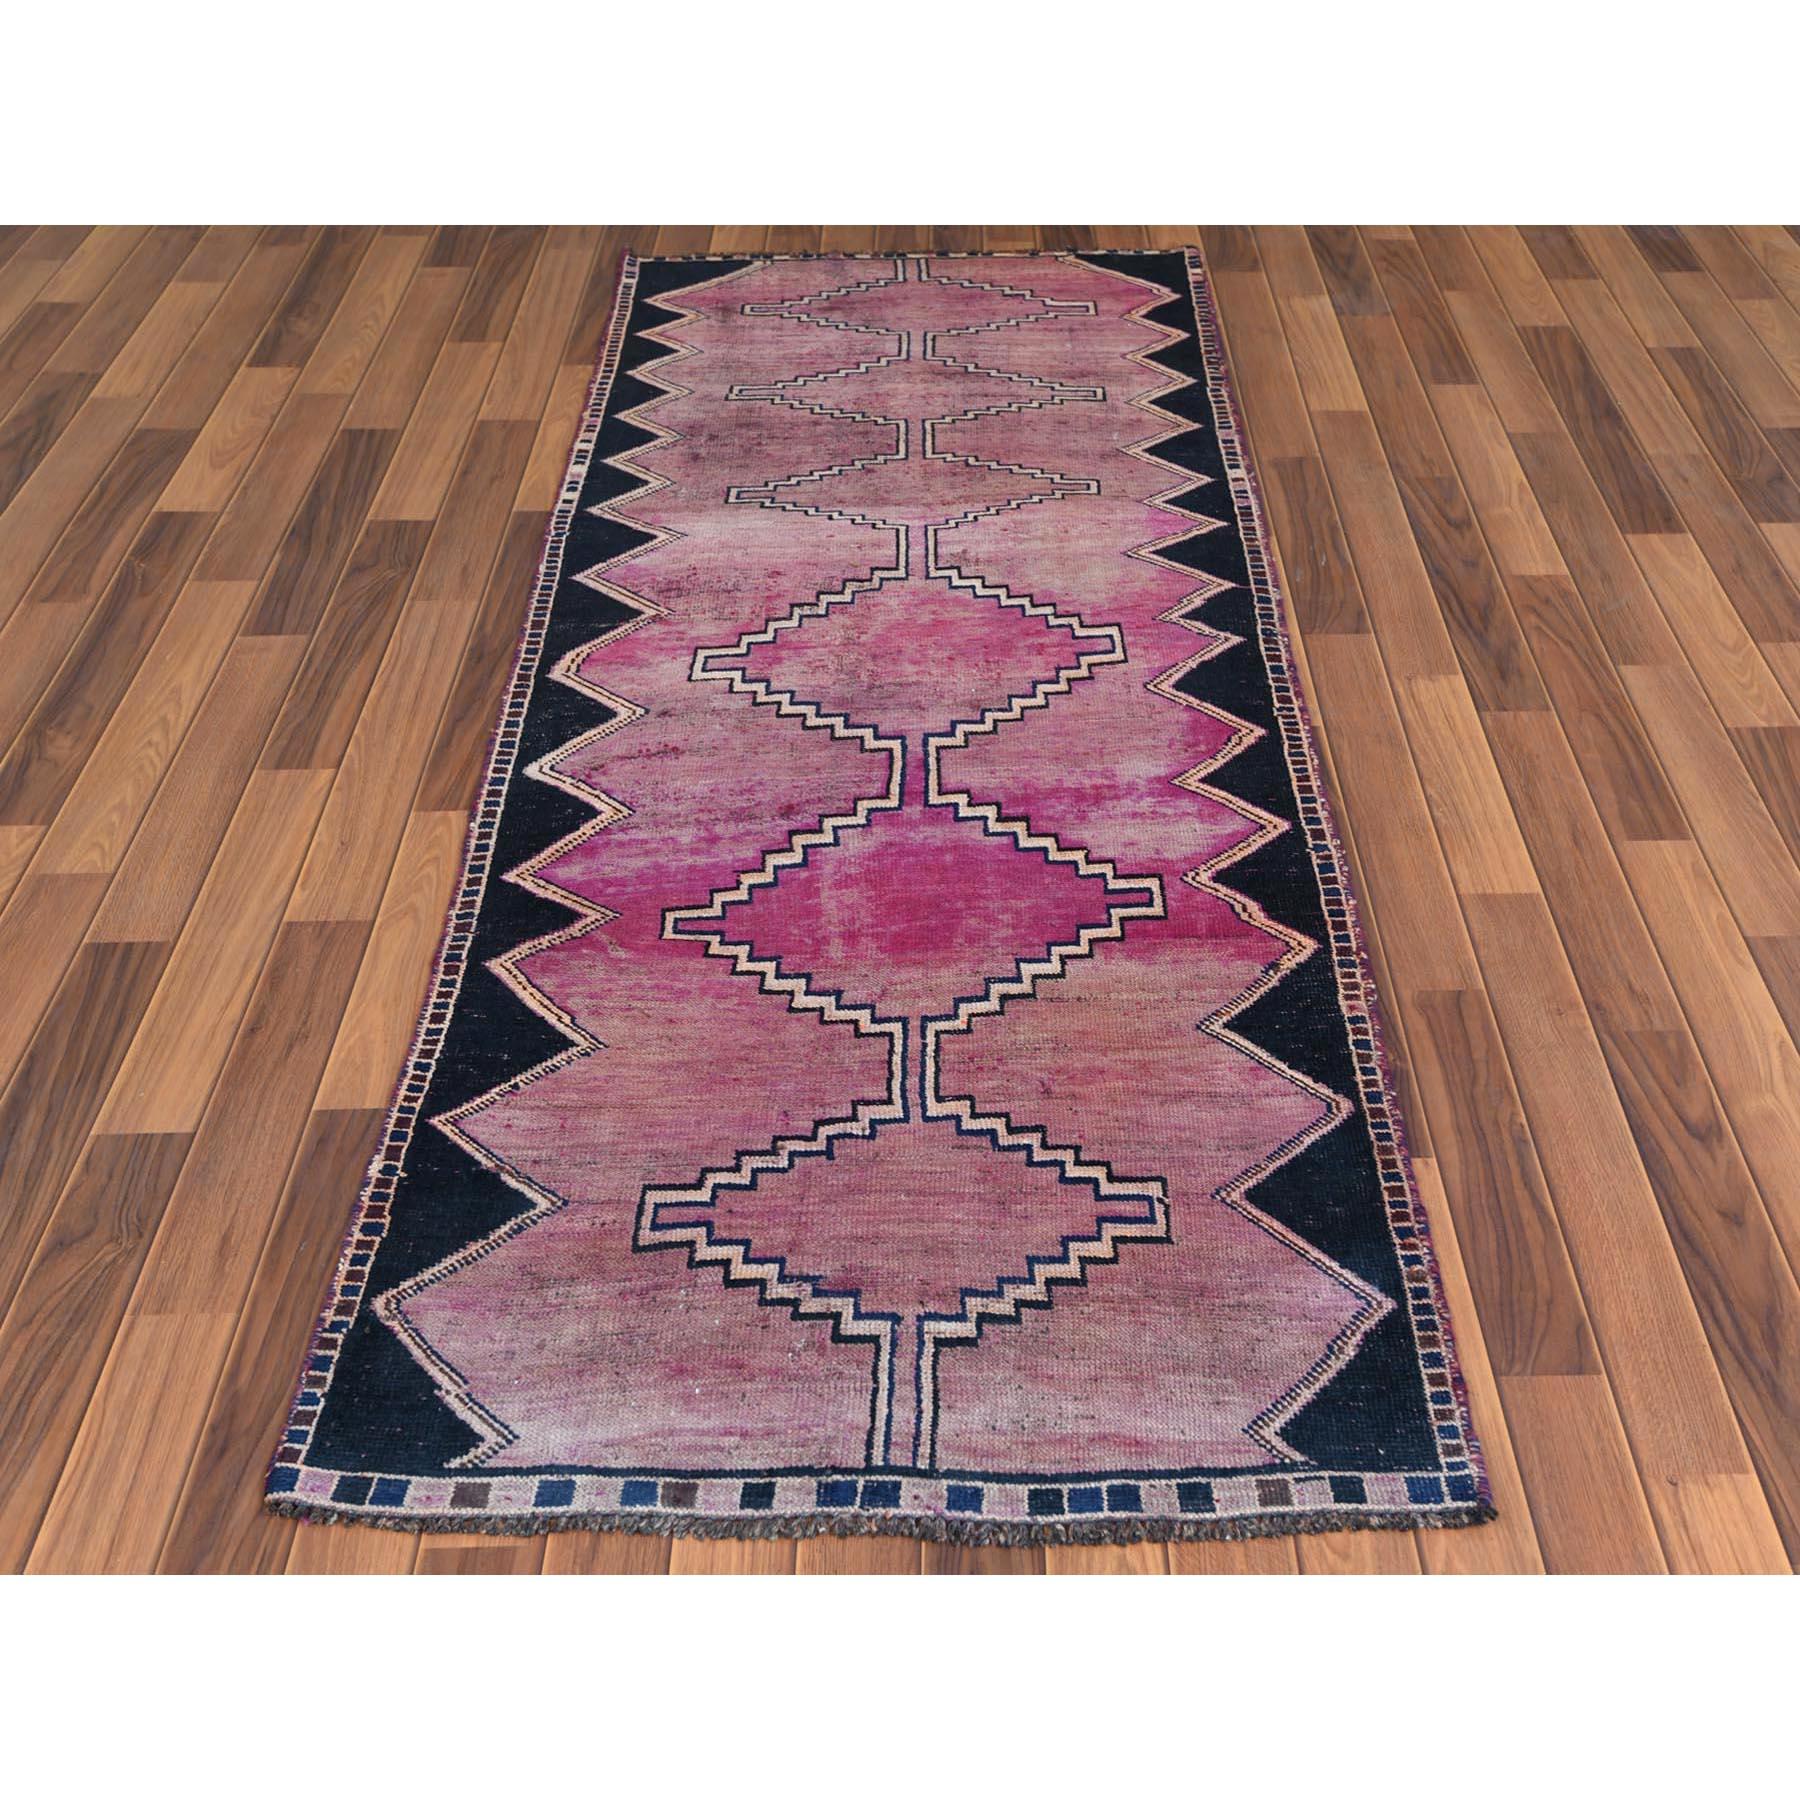 This fabulous hand knotted carpet has been created and designed for extra strength and durability. This rug has been handcrafted for weeks in the traditional method that is used to make rugs. This is truly a one of a kind piece. 

Exact rug size